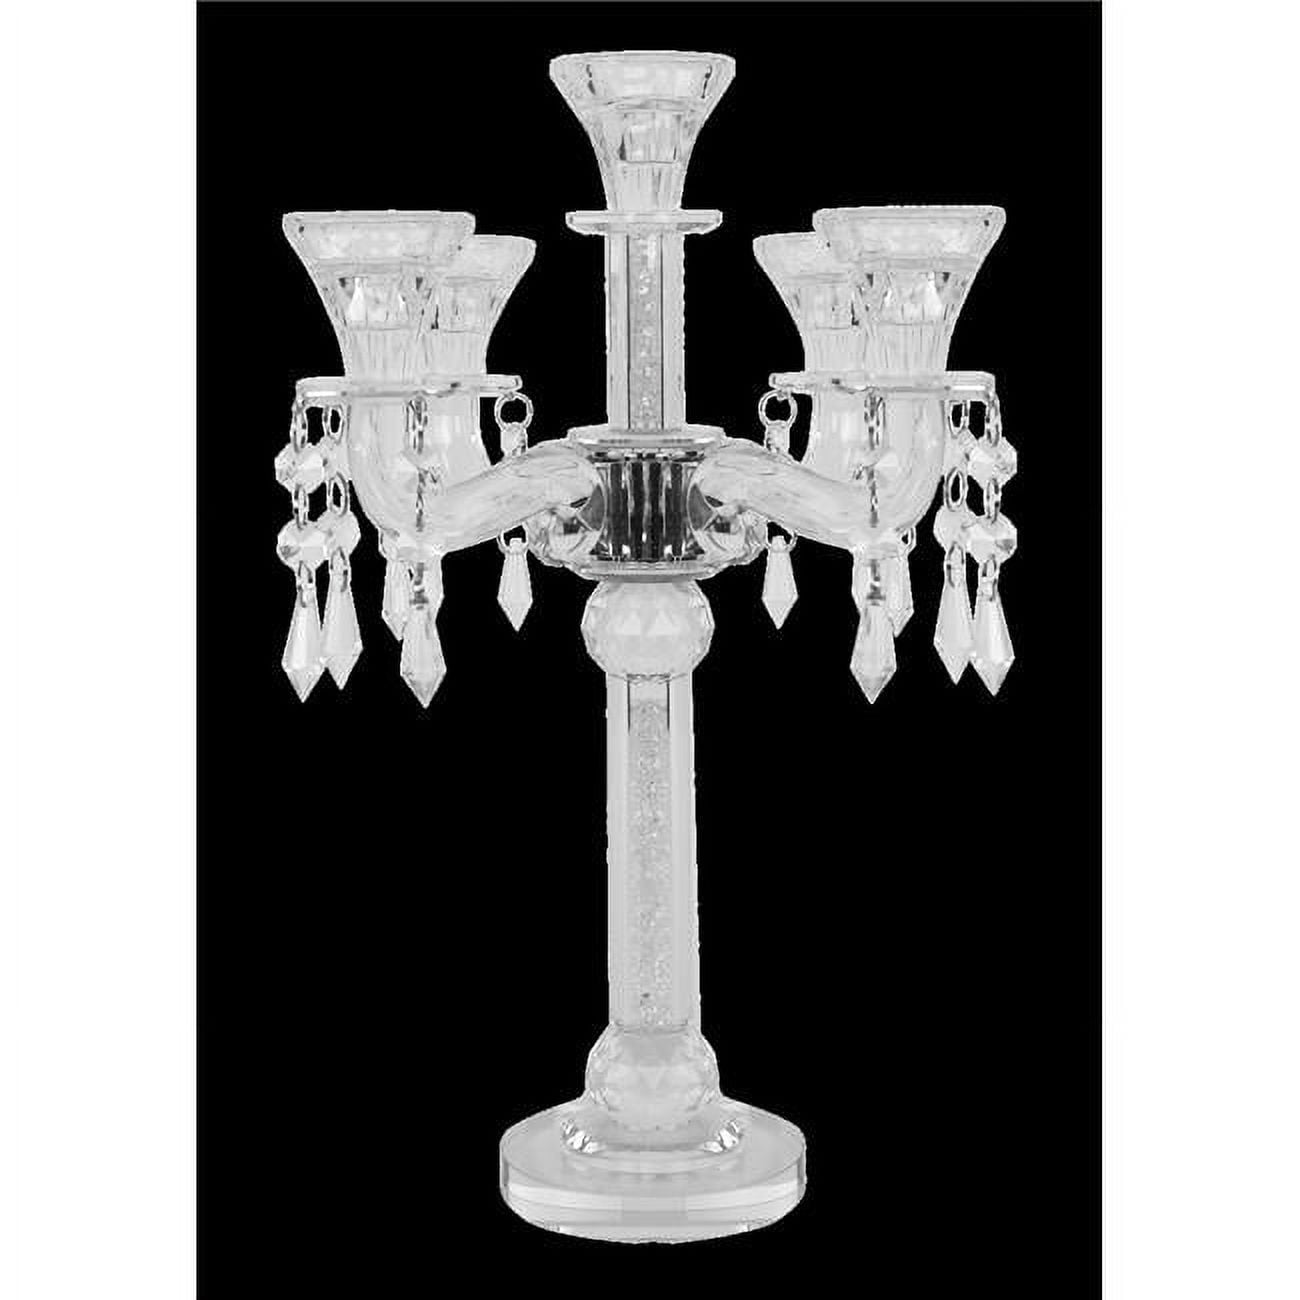 Picture of Schonfeld Collection 16677 14.75 in. 5 Lights Crystal Candelabra with Filled Stones & Hanging Crystals